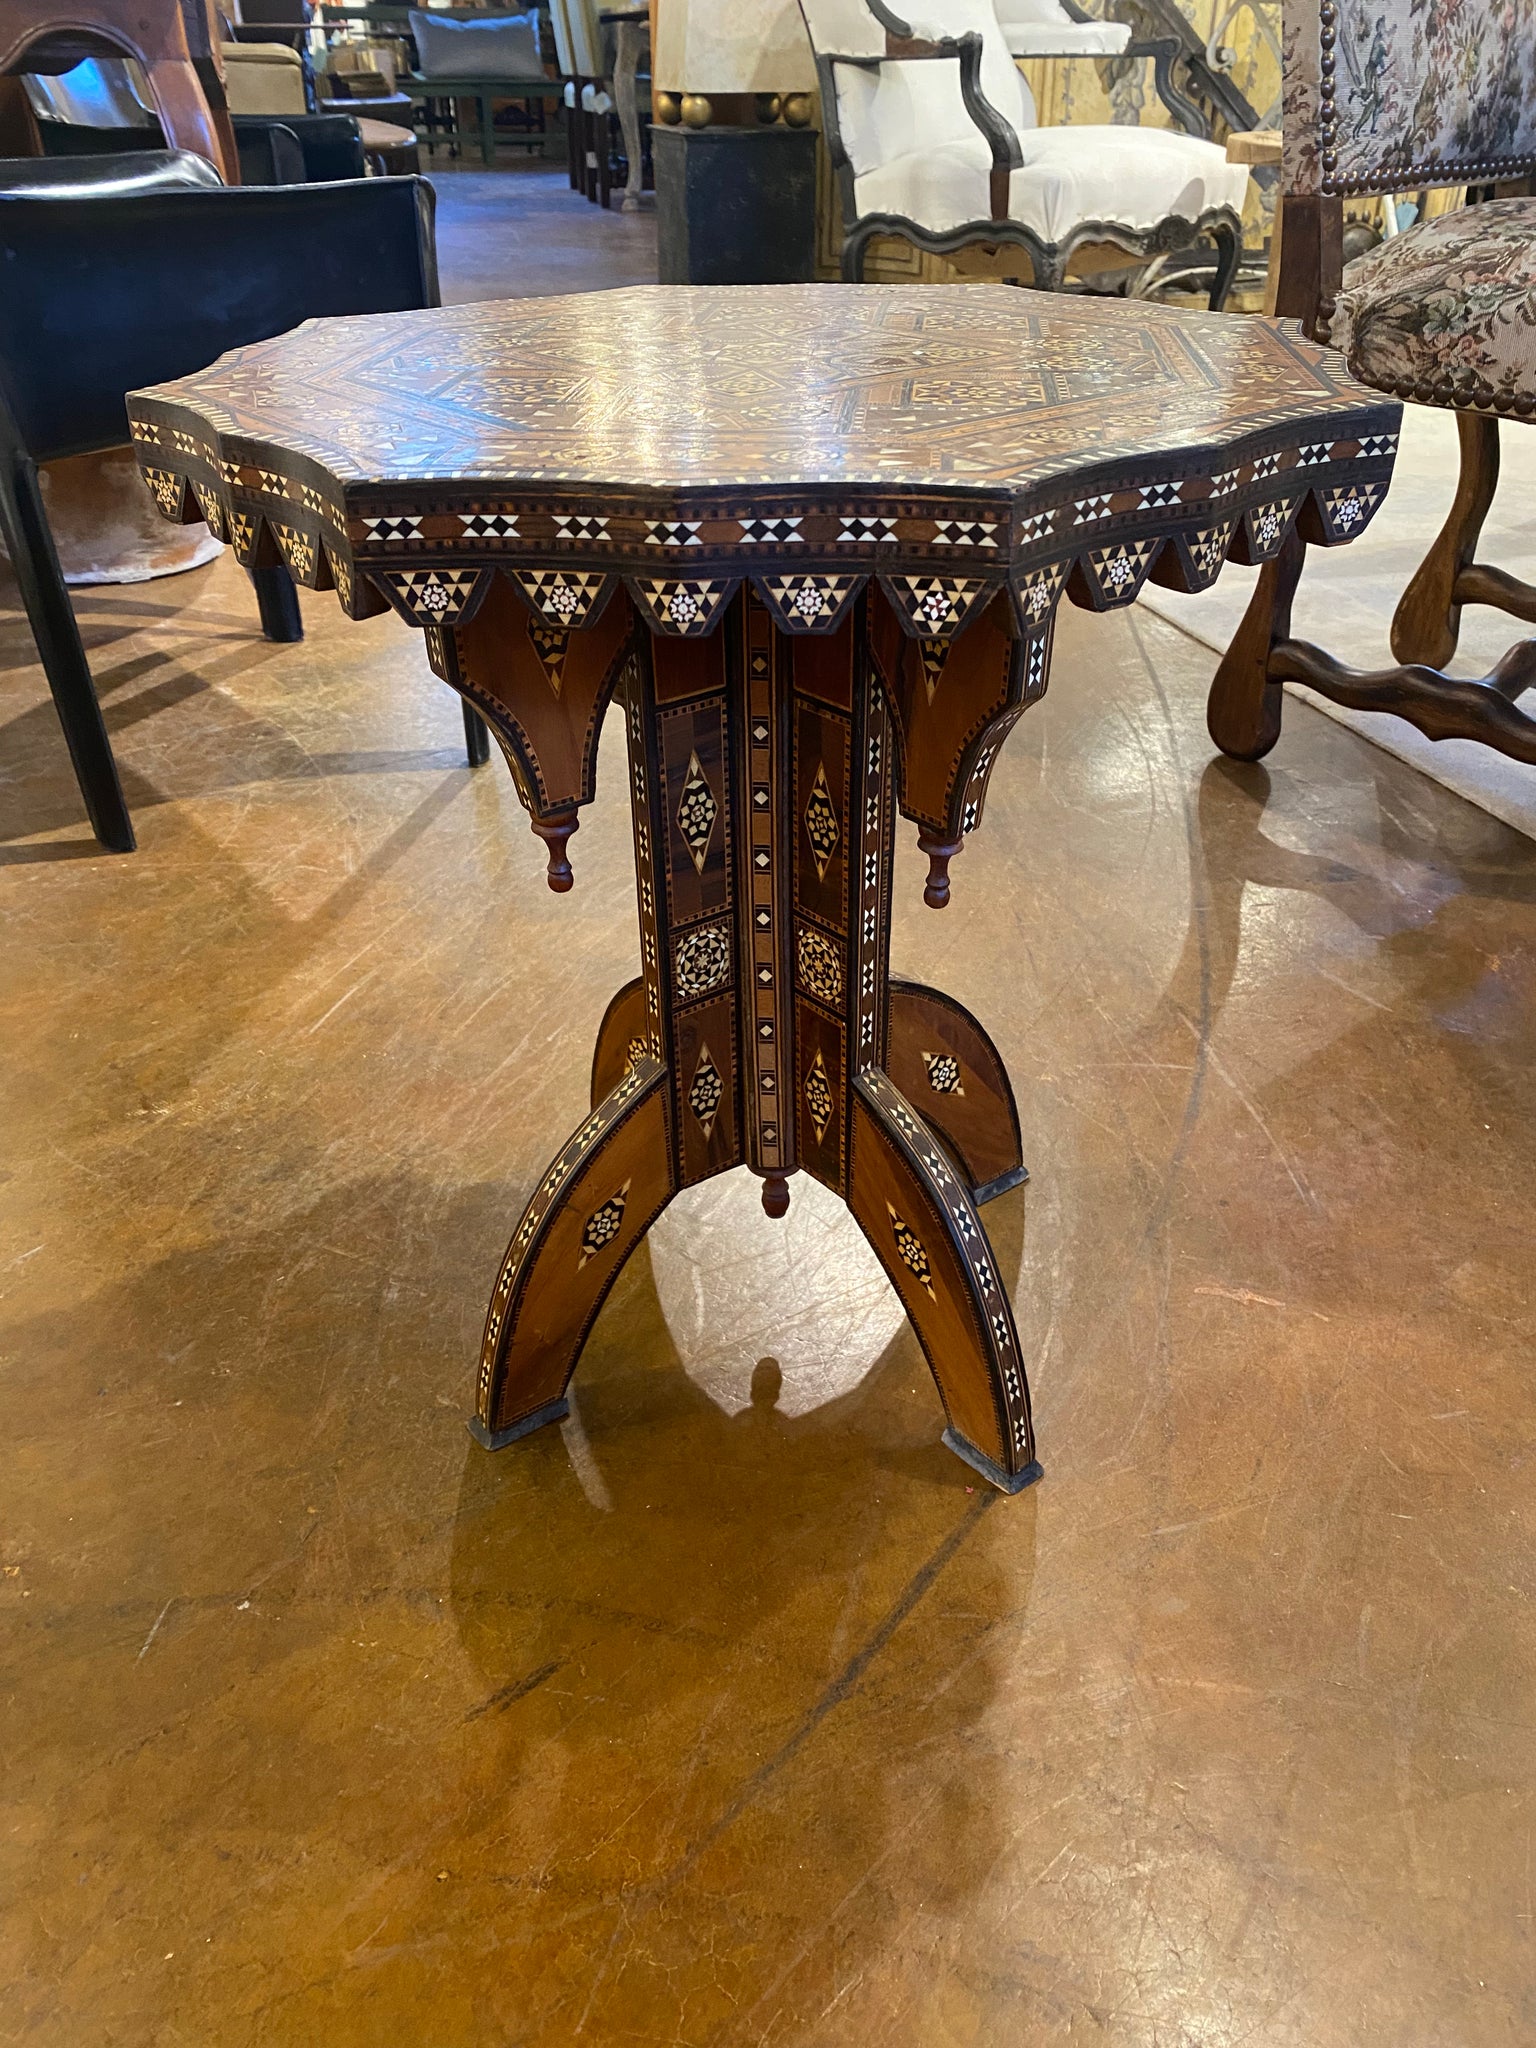 Moroccan Inlaid Table